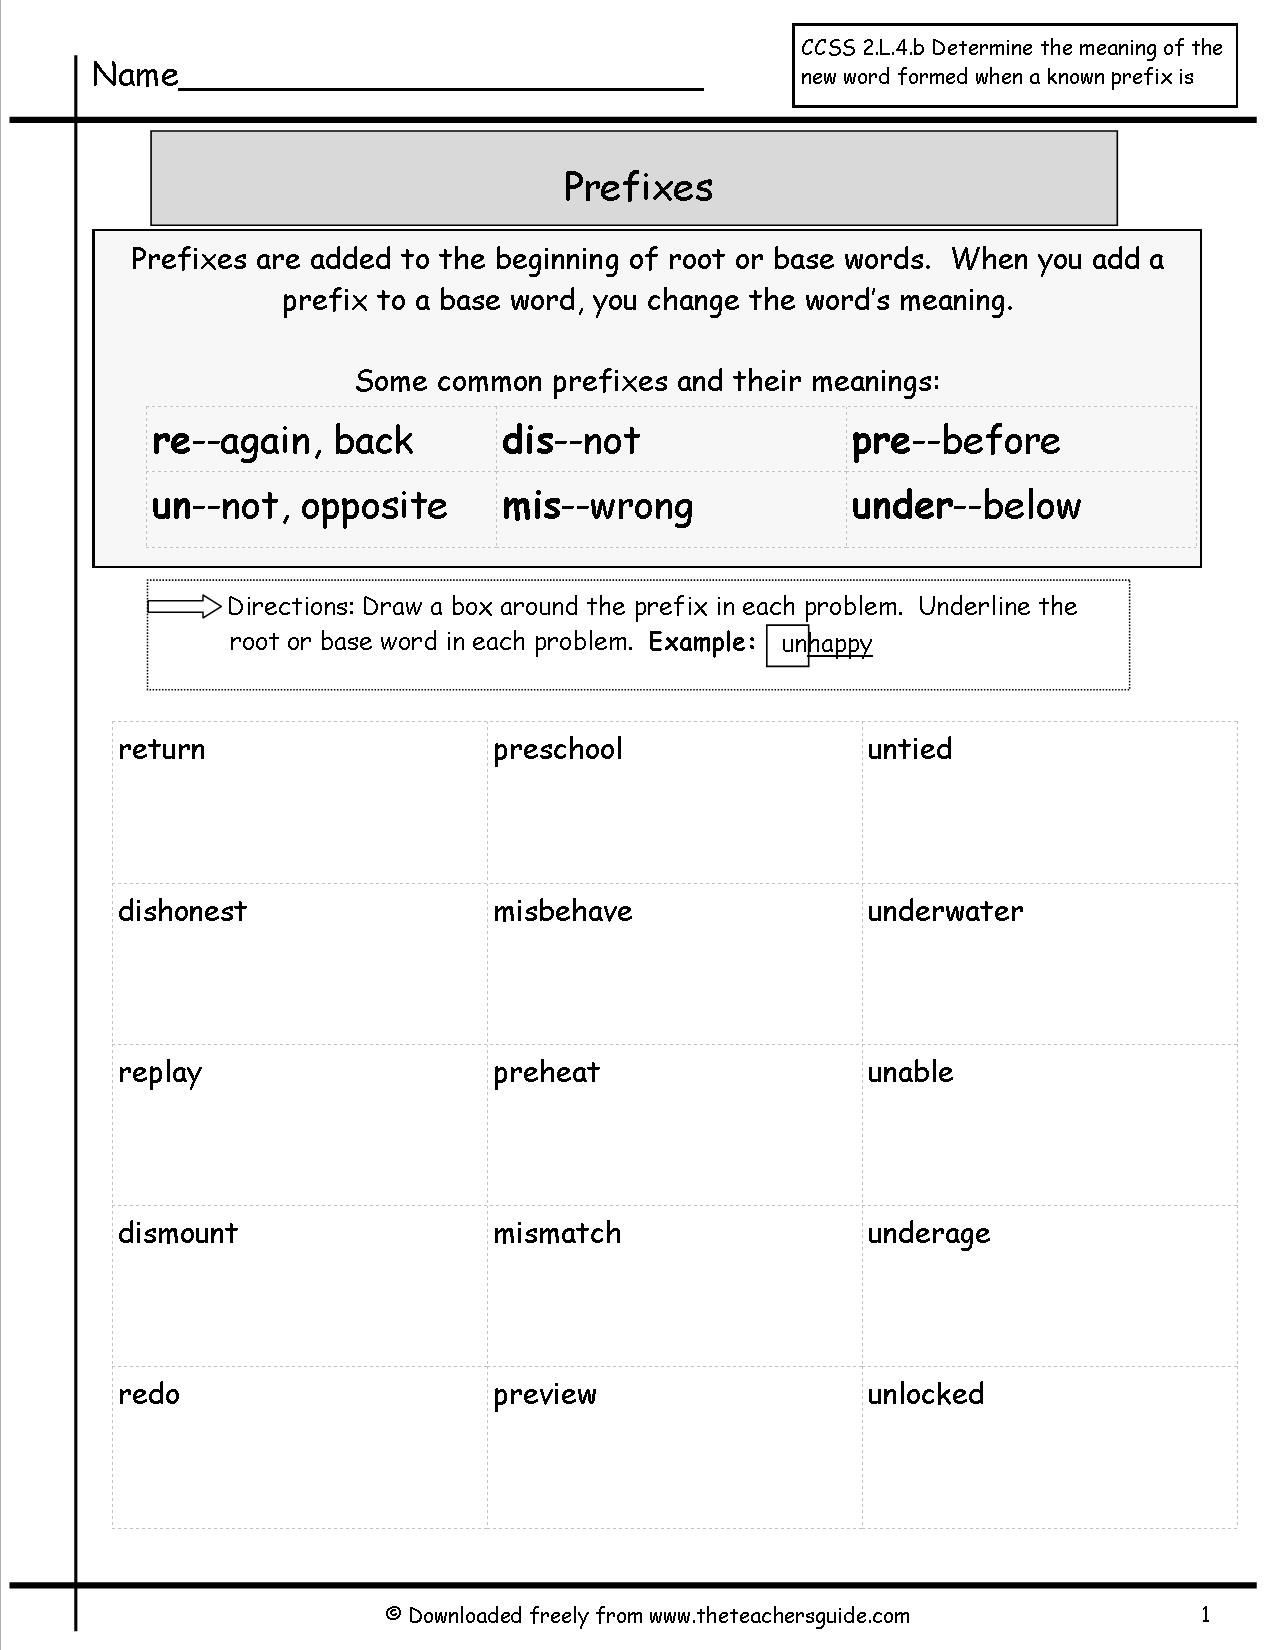 Suffixes Worksheets for 2nd Grade 36 Stunning Prefix and Suffix Worksheets Ideas